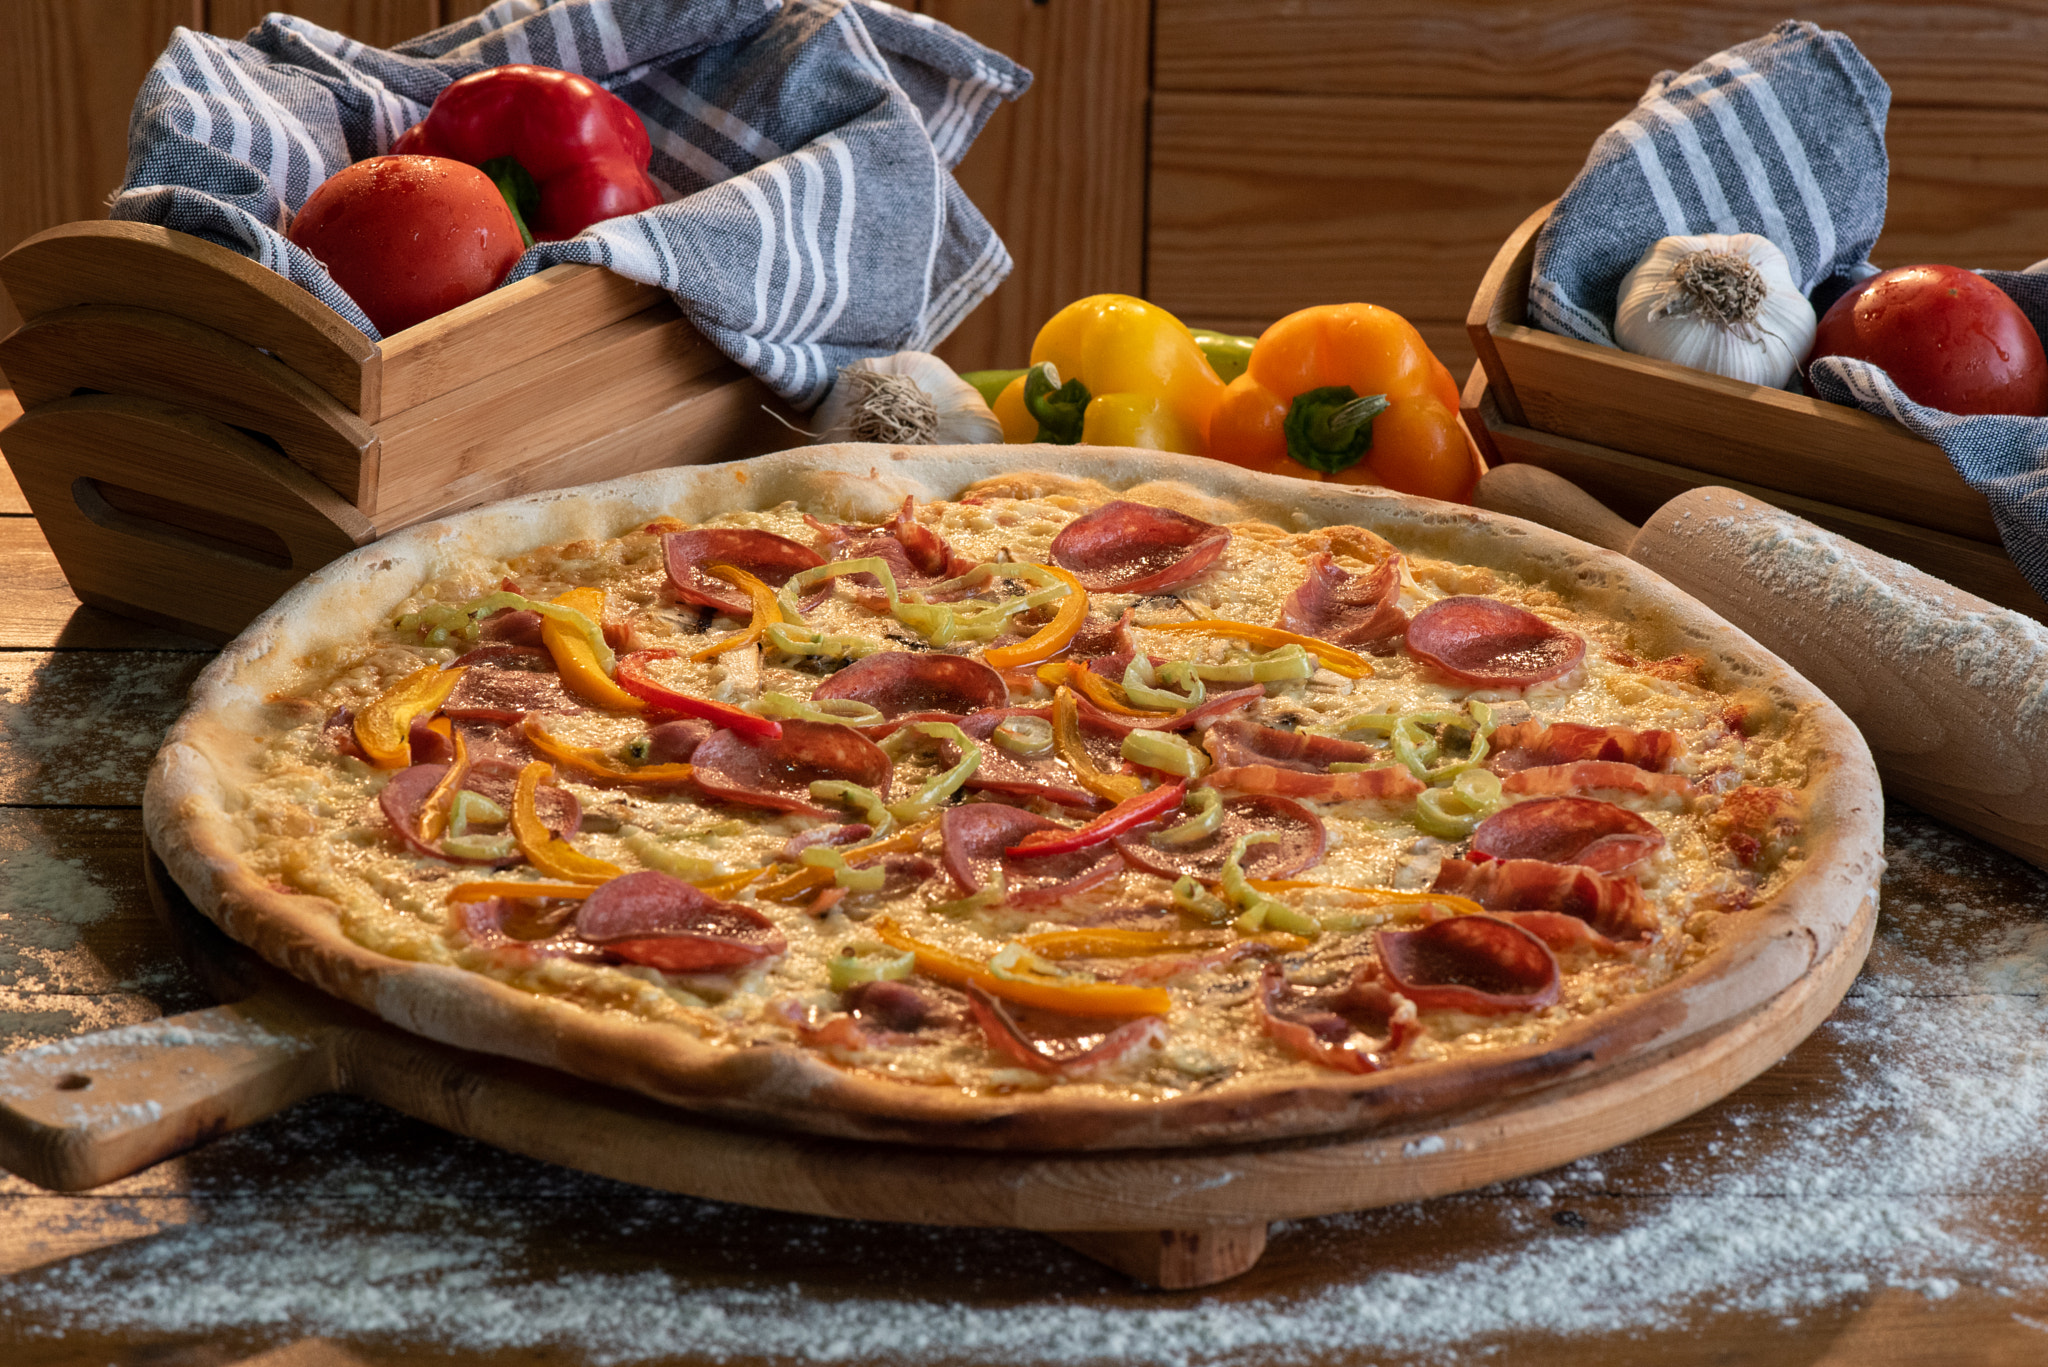 General 2048x1367 food rolling pin pizza Paprika vegetables cutting board tomatoes bell peppers Garlic flour still life